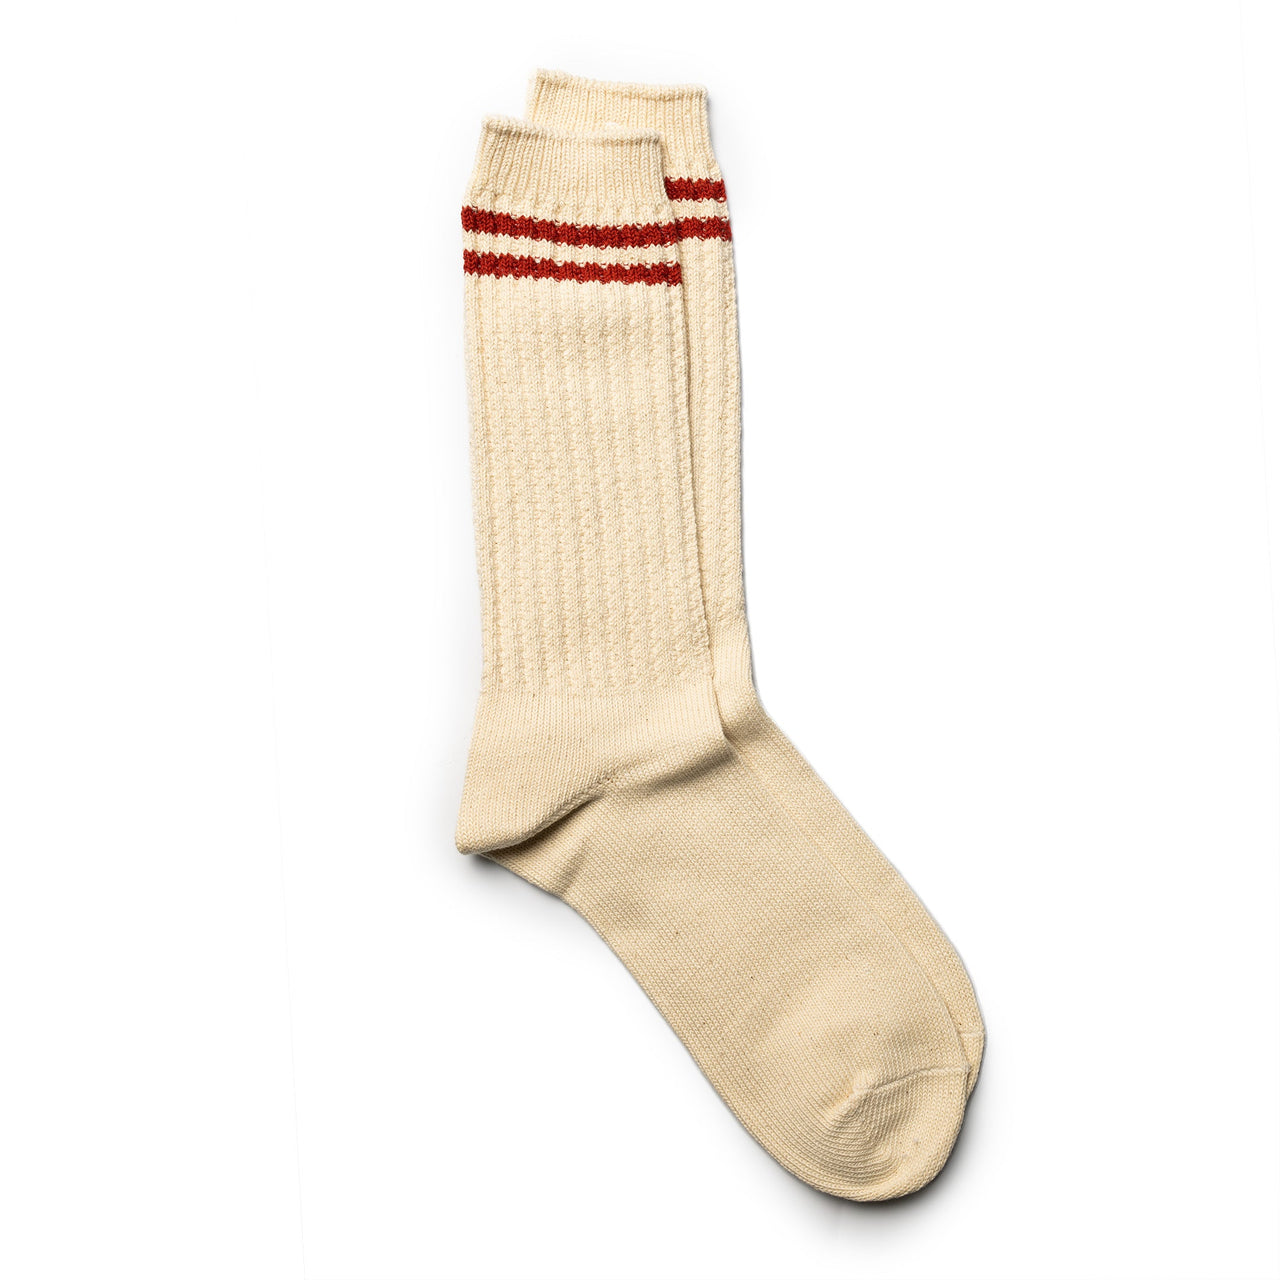 Anonymous Ism OC 2Line Pique Rib Crew Sock Red-Socks-Clutch Cafe